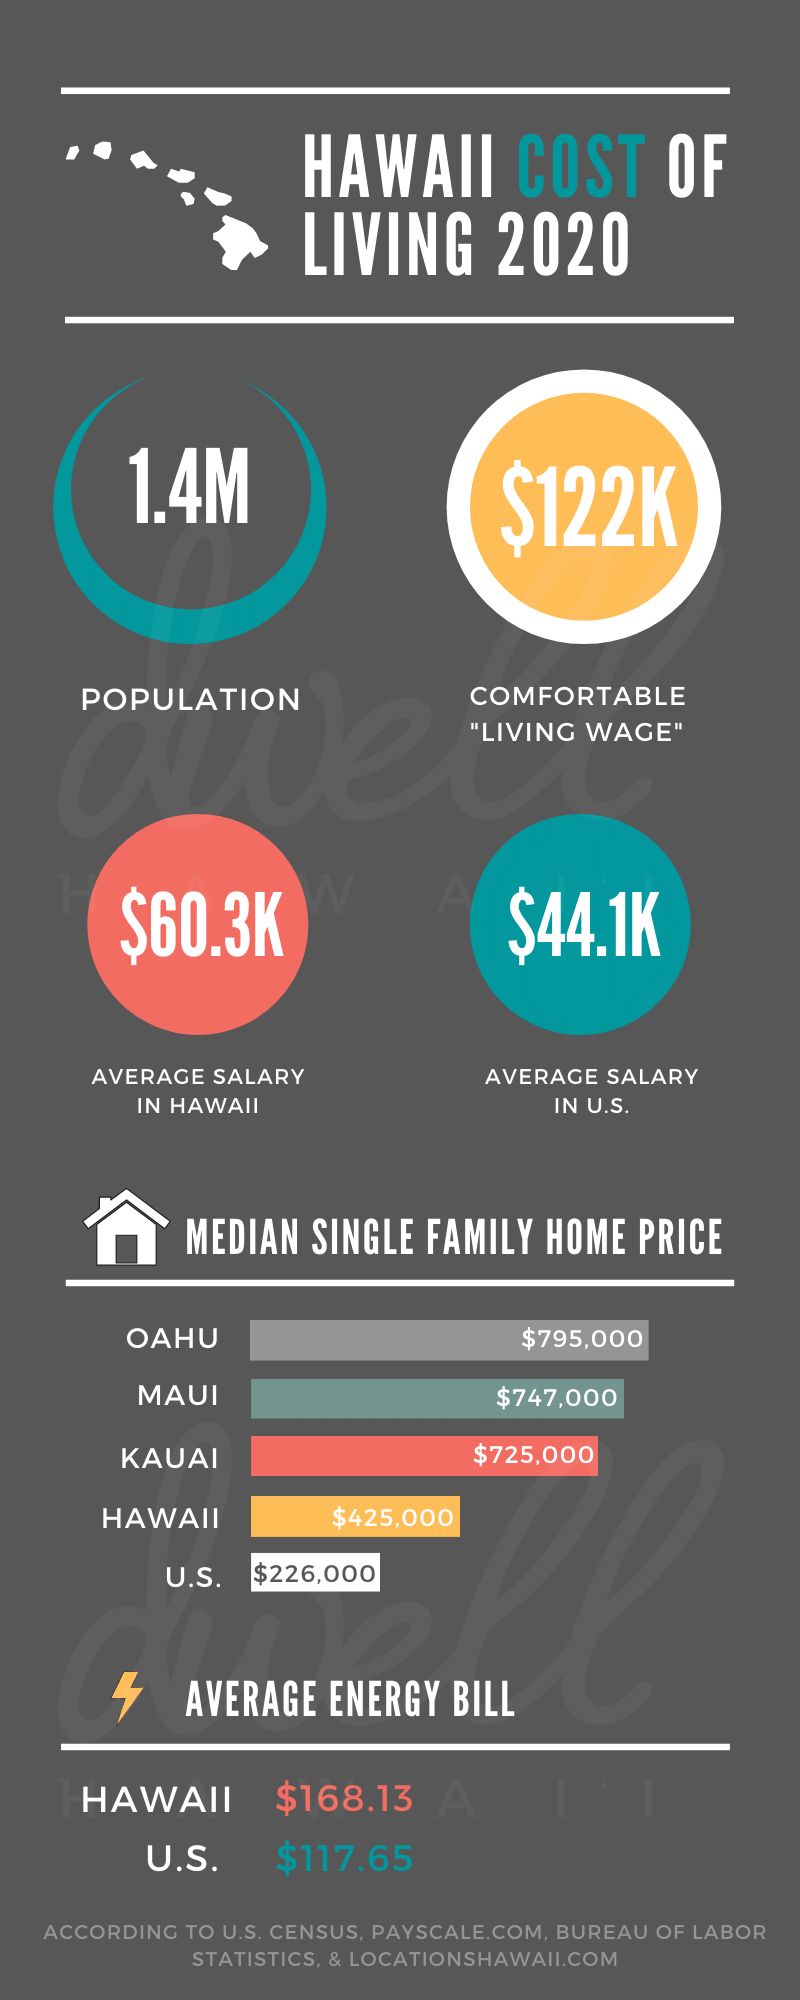 what is the cost of living in hawaii 